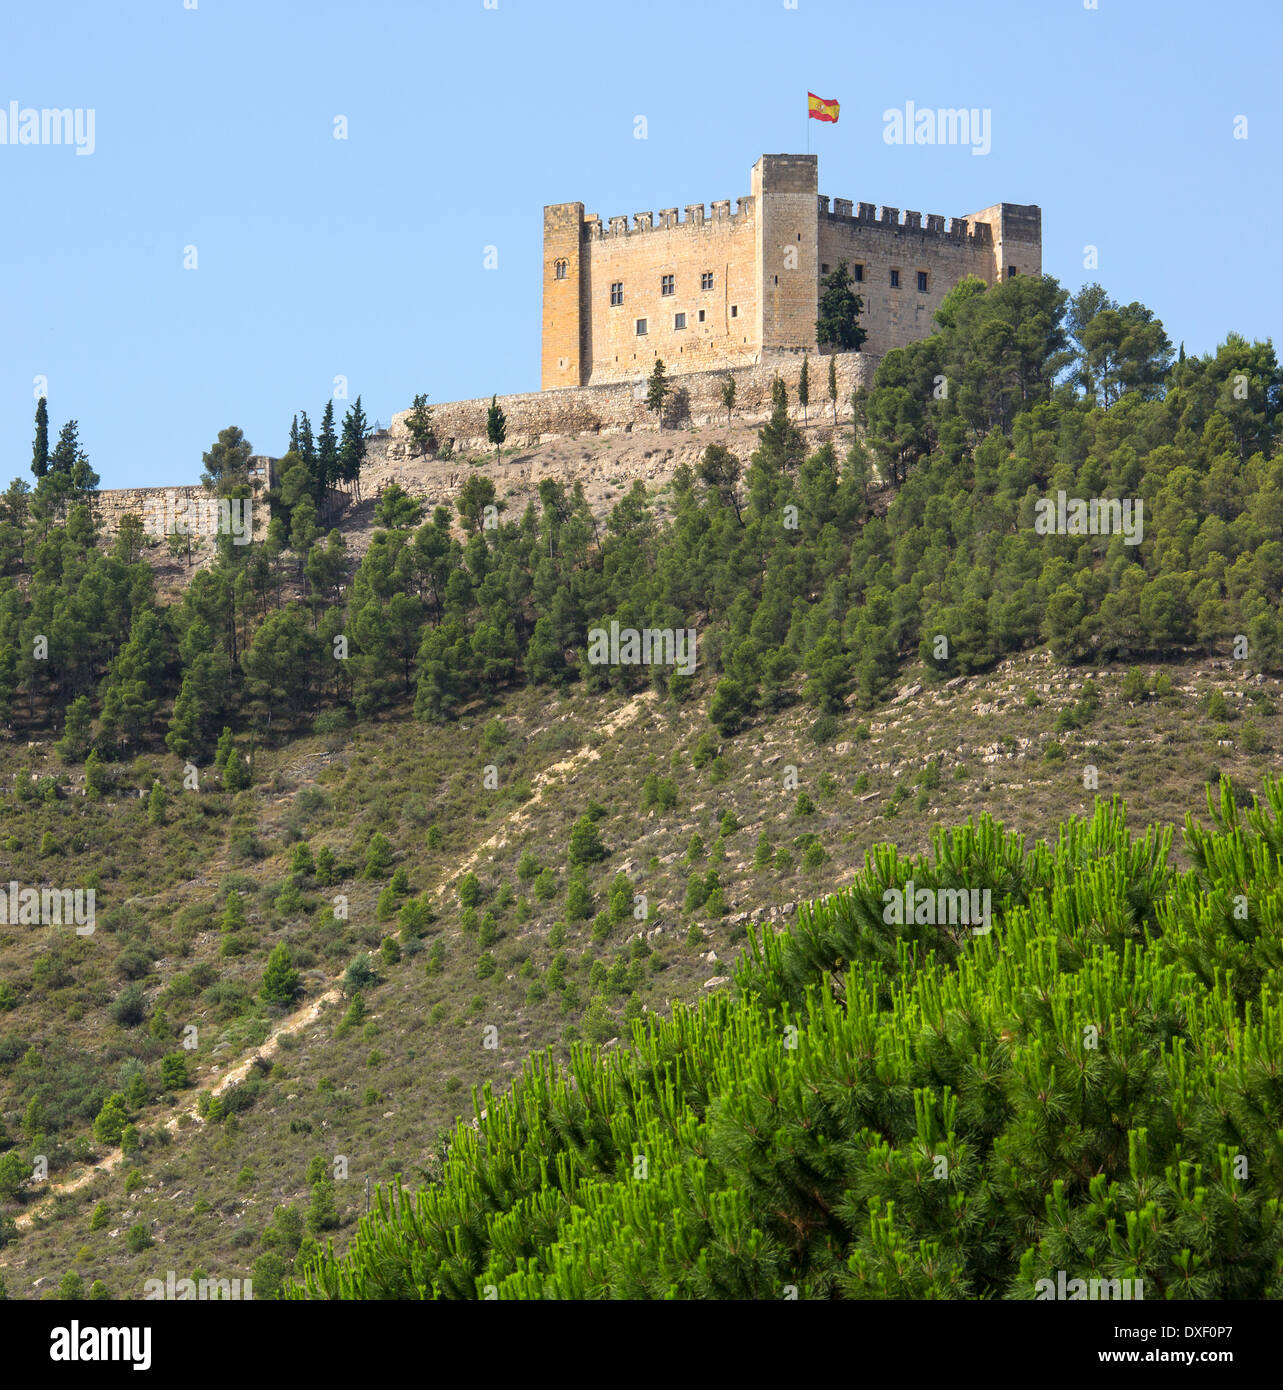 Mequinenza Castle on a hill high above the small town of Mequinenza in central Spain. Stock Photo